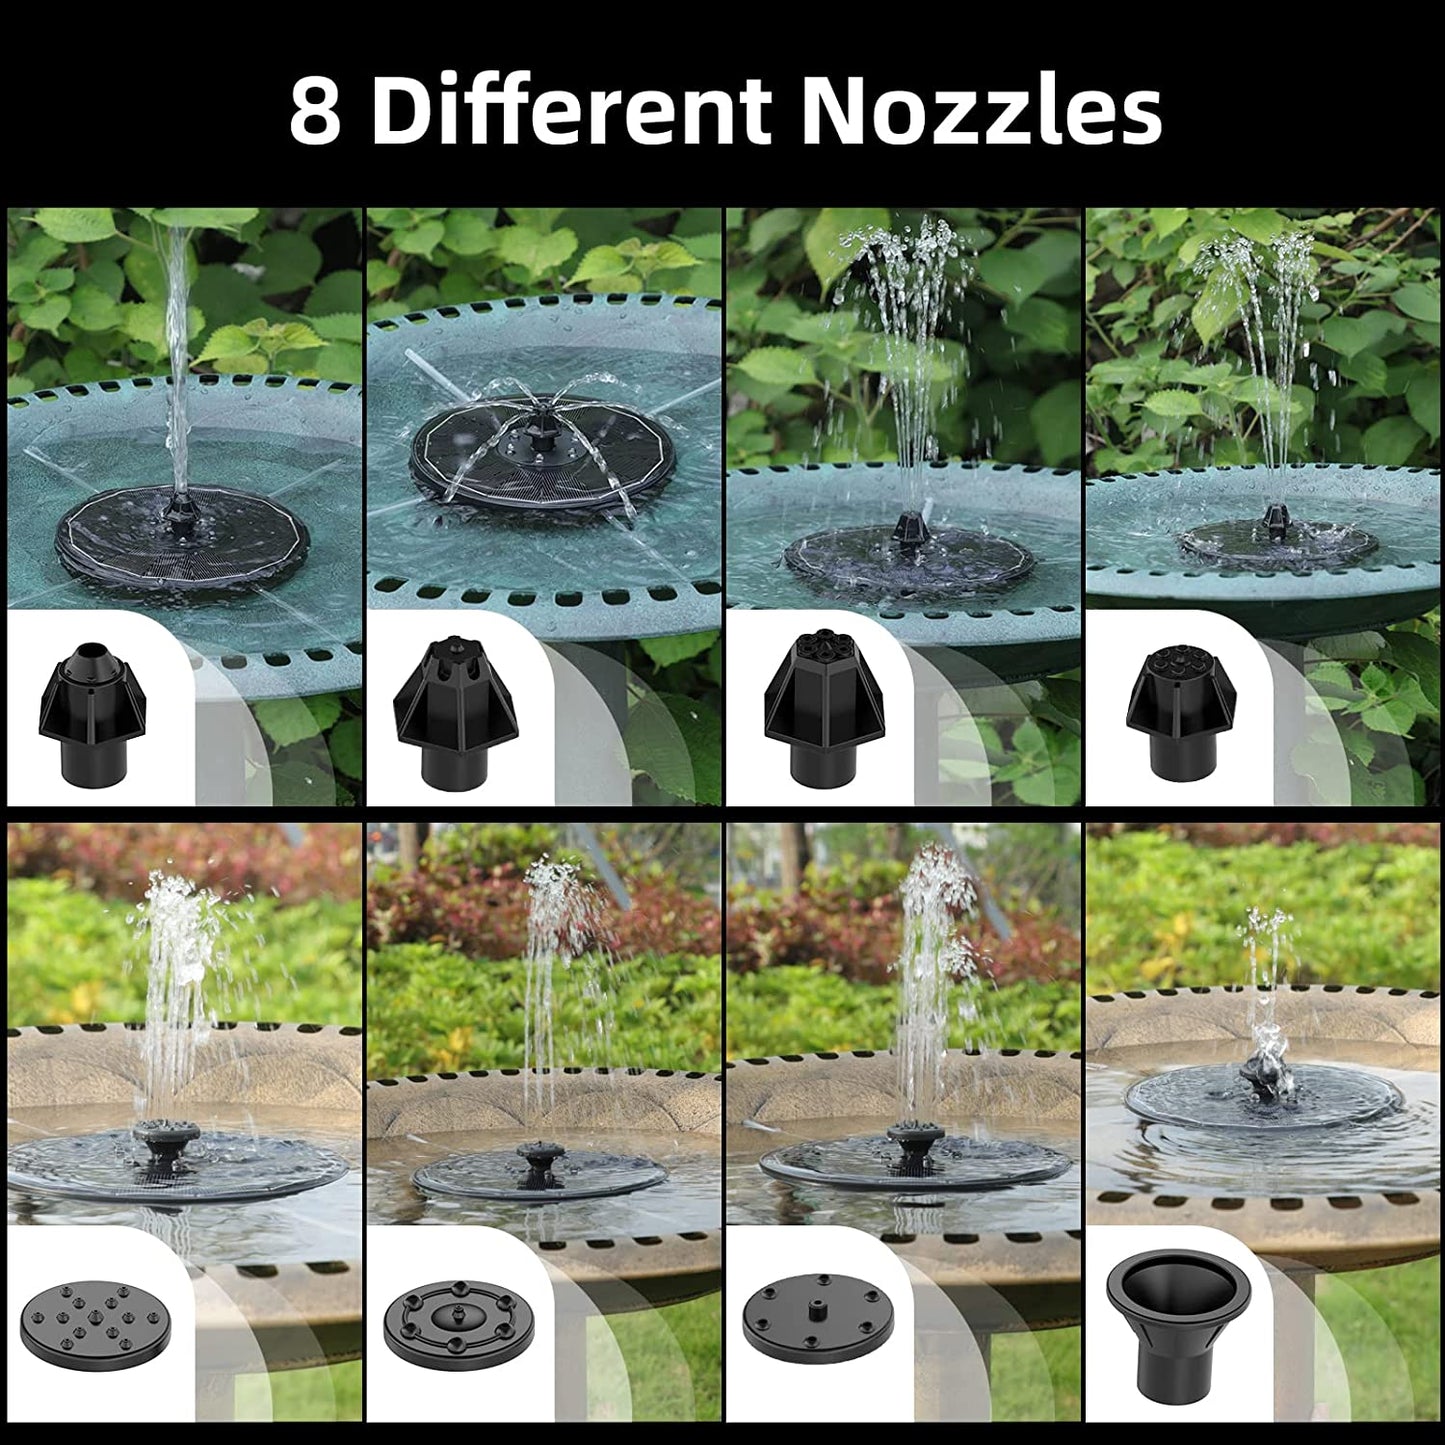 3W Solar Fountain Water Pump with color LED Lights for Bird Bath with 7 Nozzles & 4 Fixers Floating Garden Pond Tank